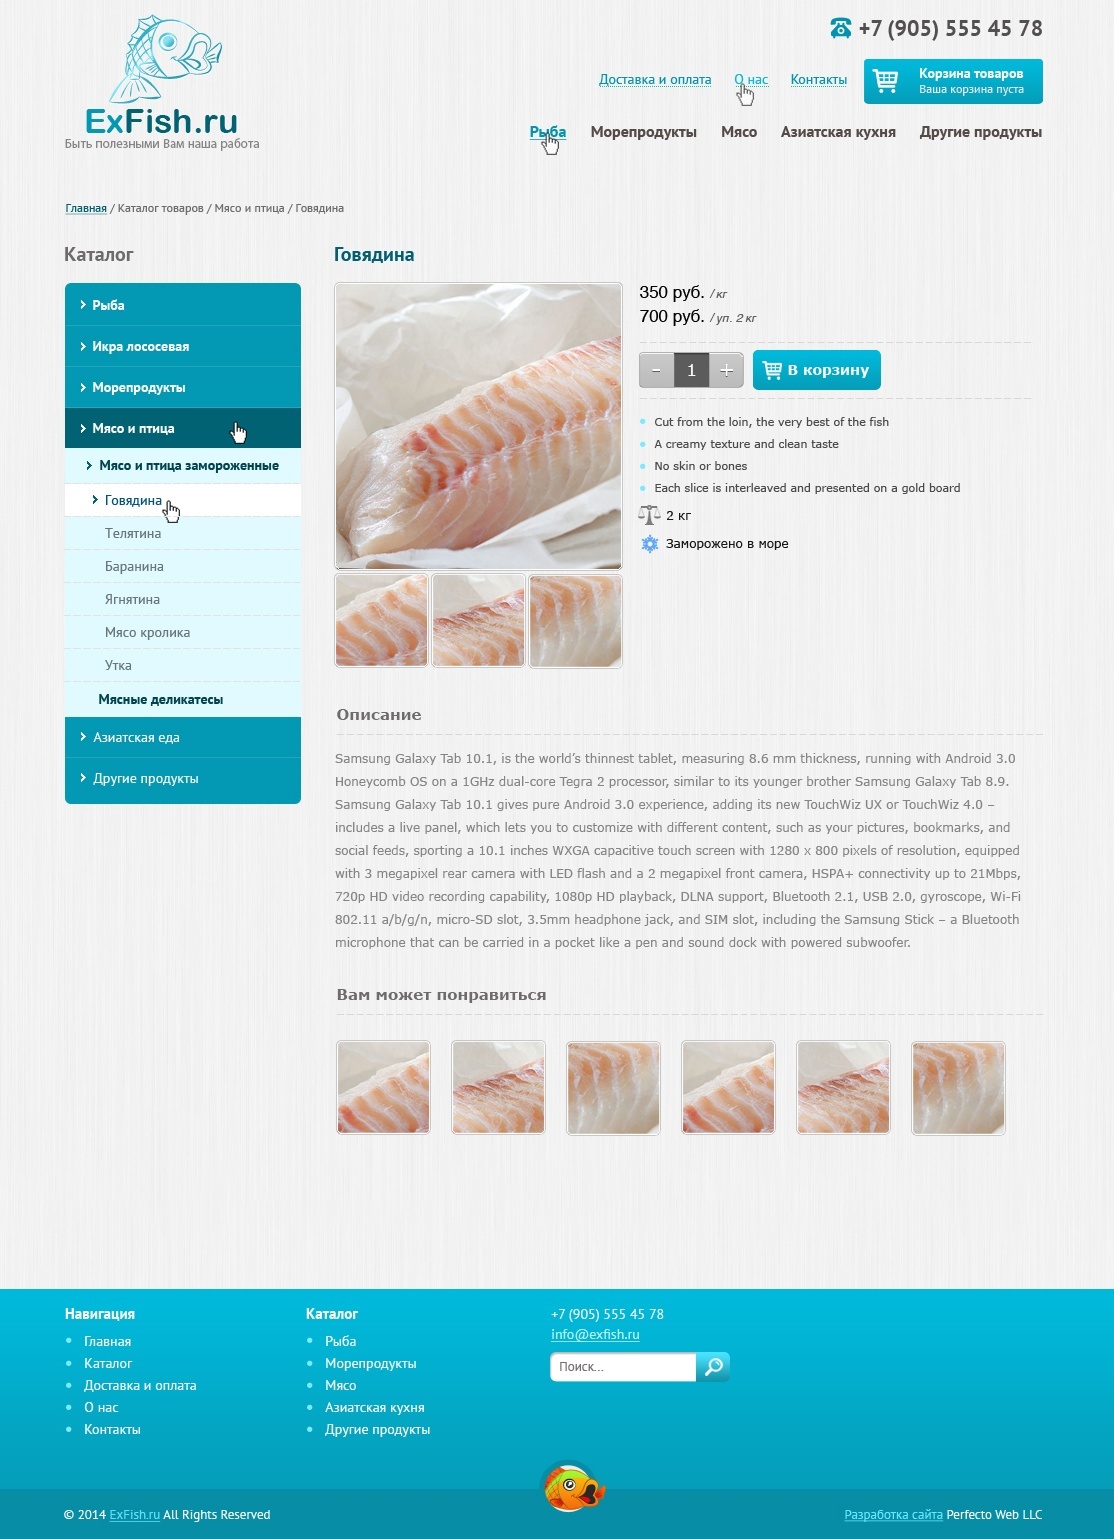 ExFish №4- Product page